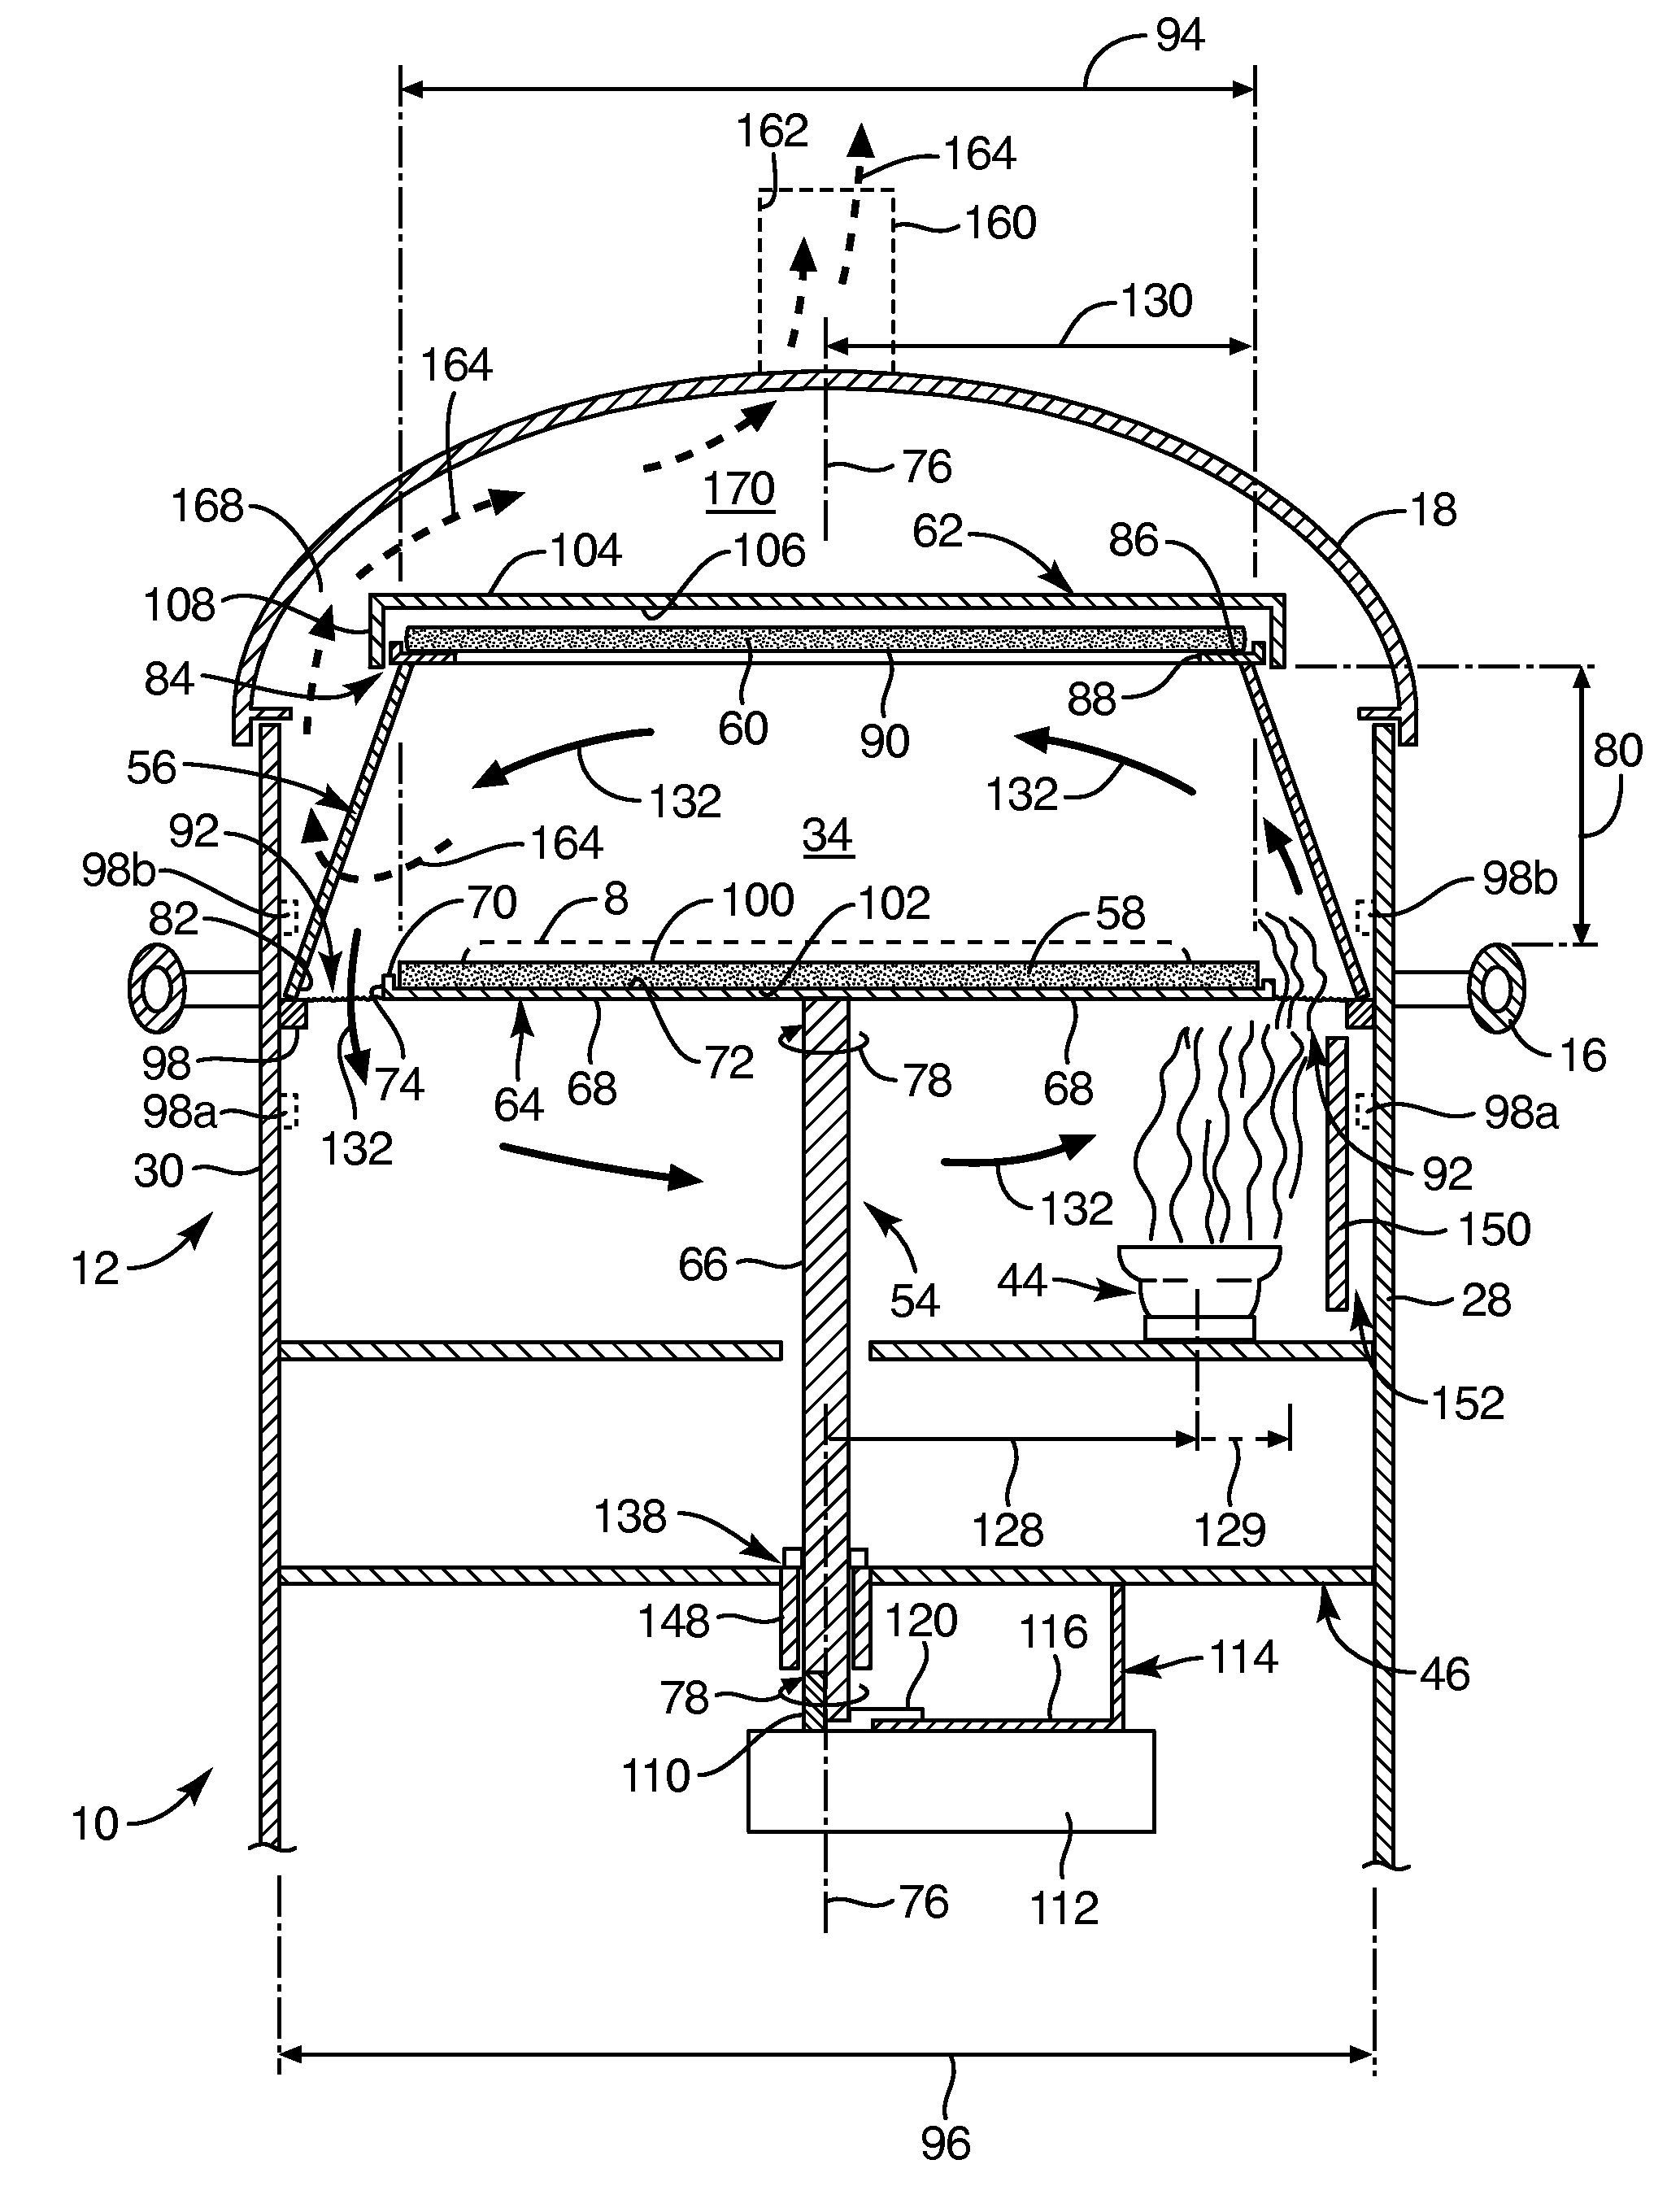 System, device, and method for baking a food product